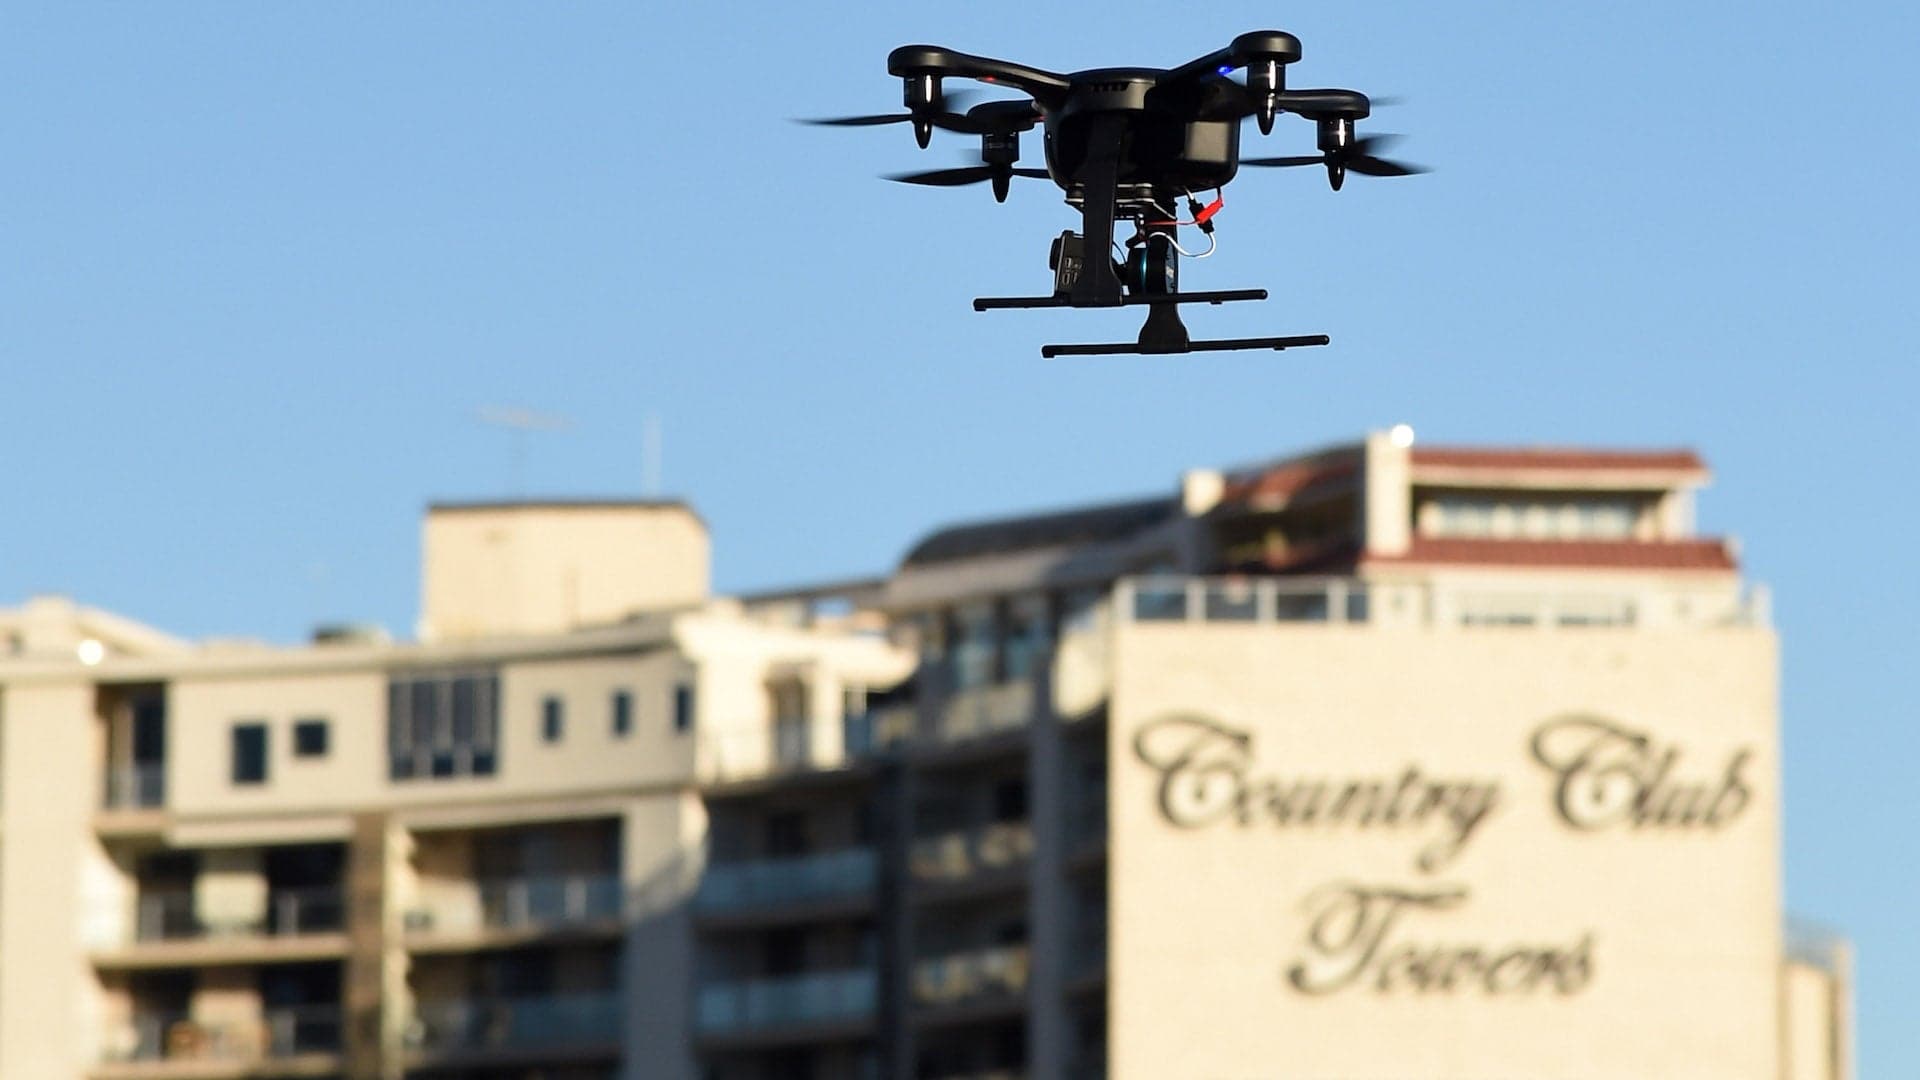 Las Vegas is Home to the Most Registered Drone Users in the US